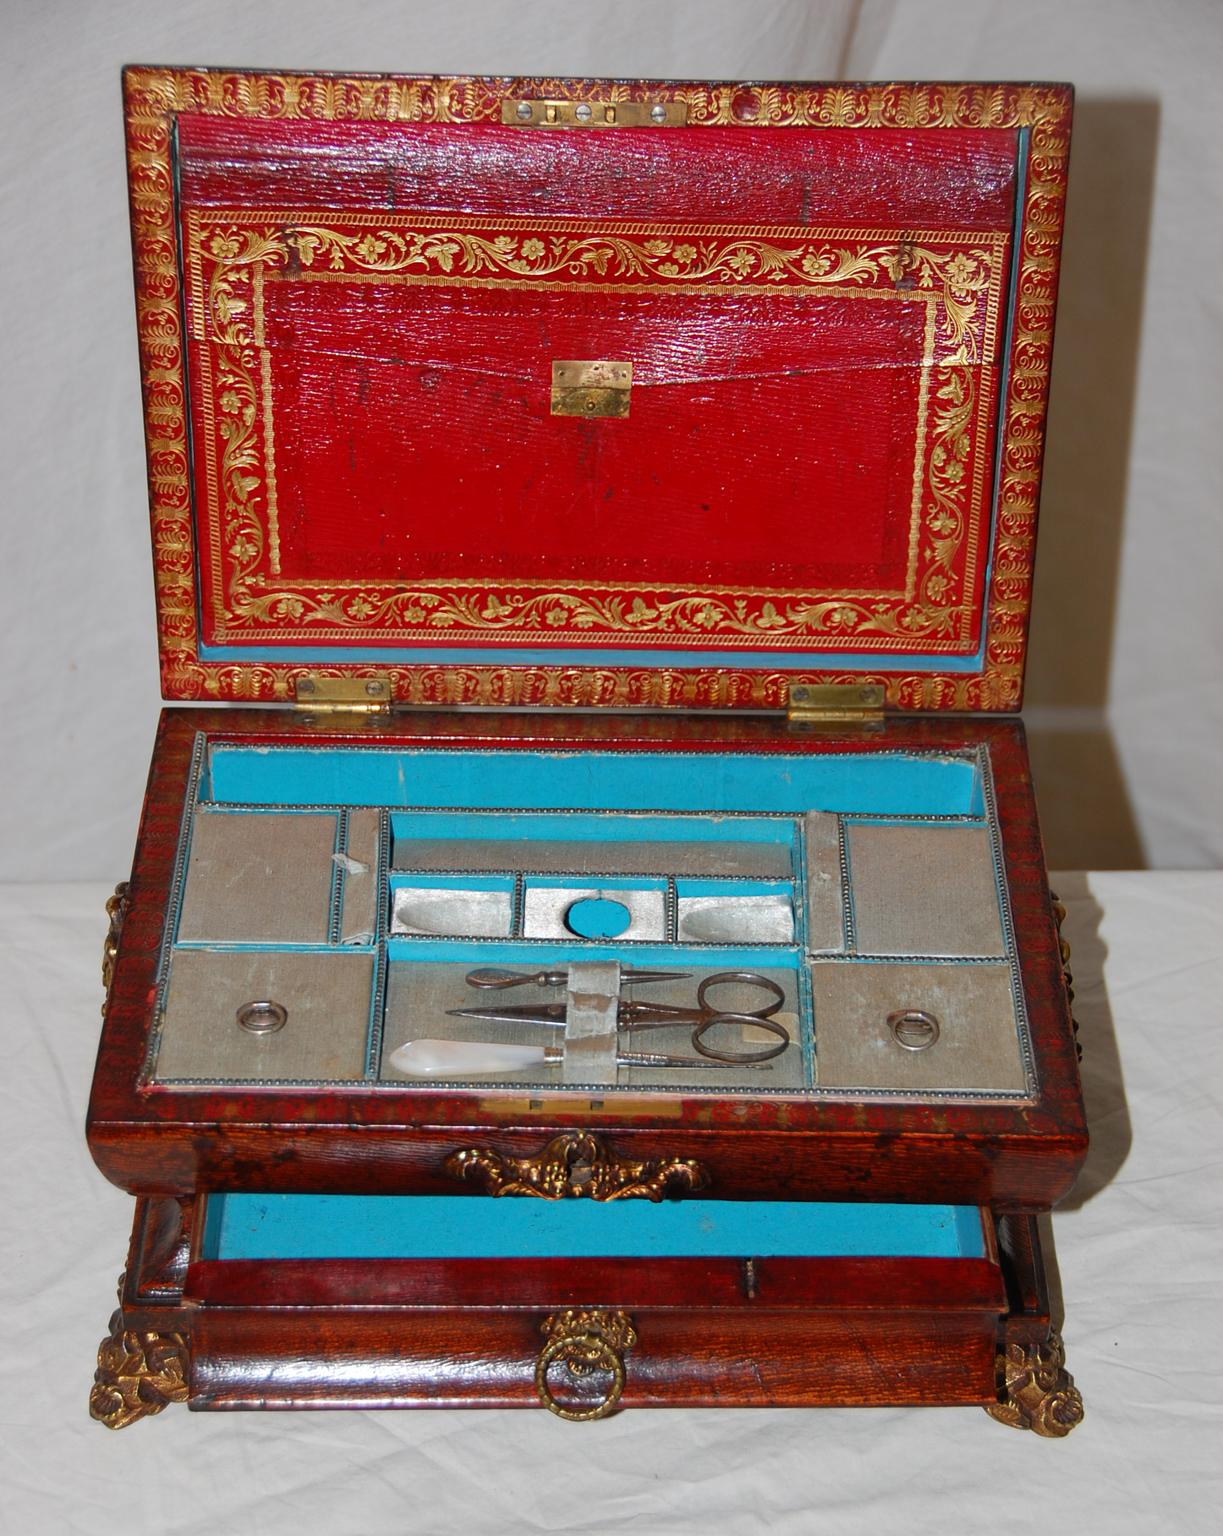 English Regency period embossed leather fitted sewing box with drawer and original brass handles, feet and mounts. When the lid is lifted there is a red leather embossed envelope which opens for discrete storage in the lid, the interior is fitted